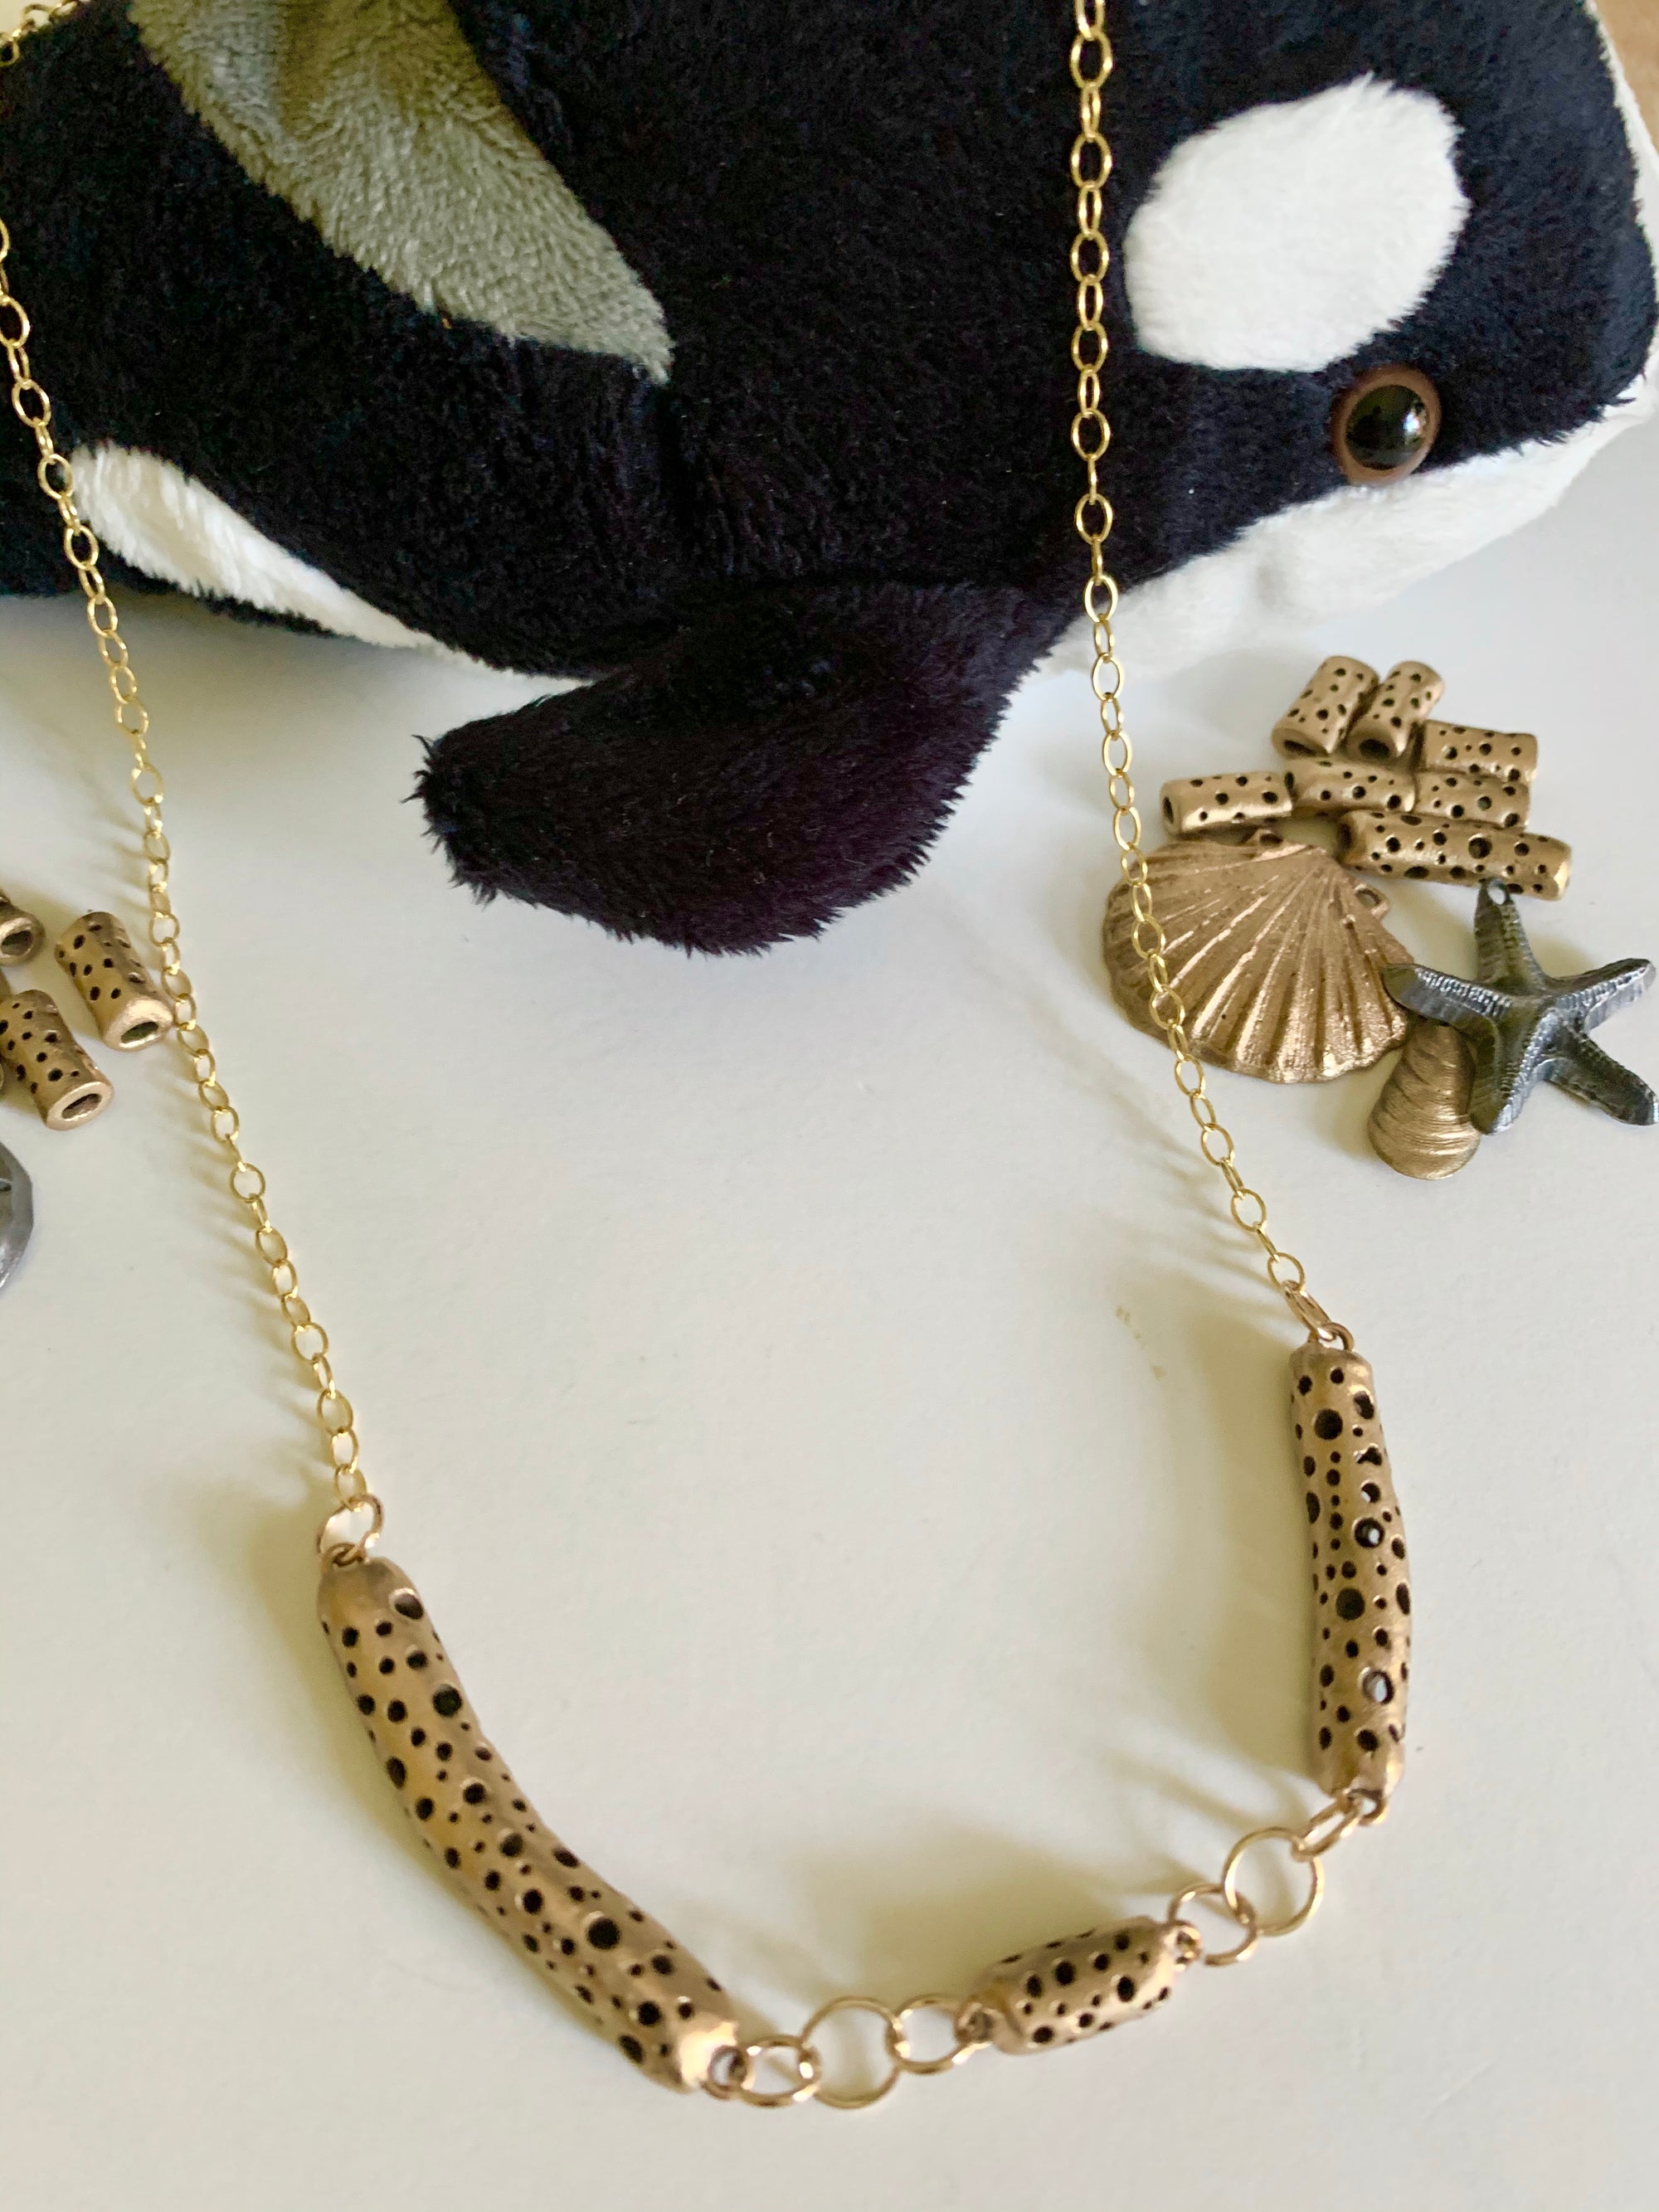 It's a whale of a {bronze} necklace